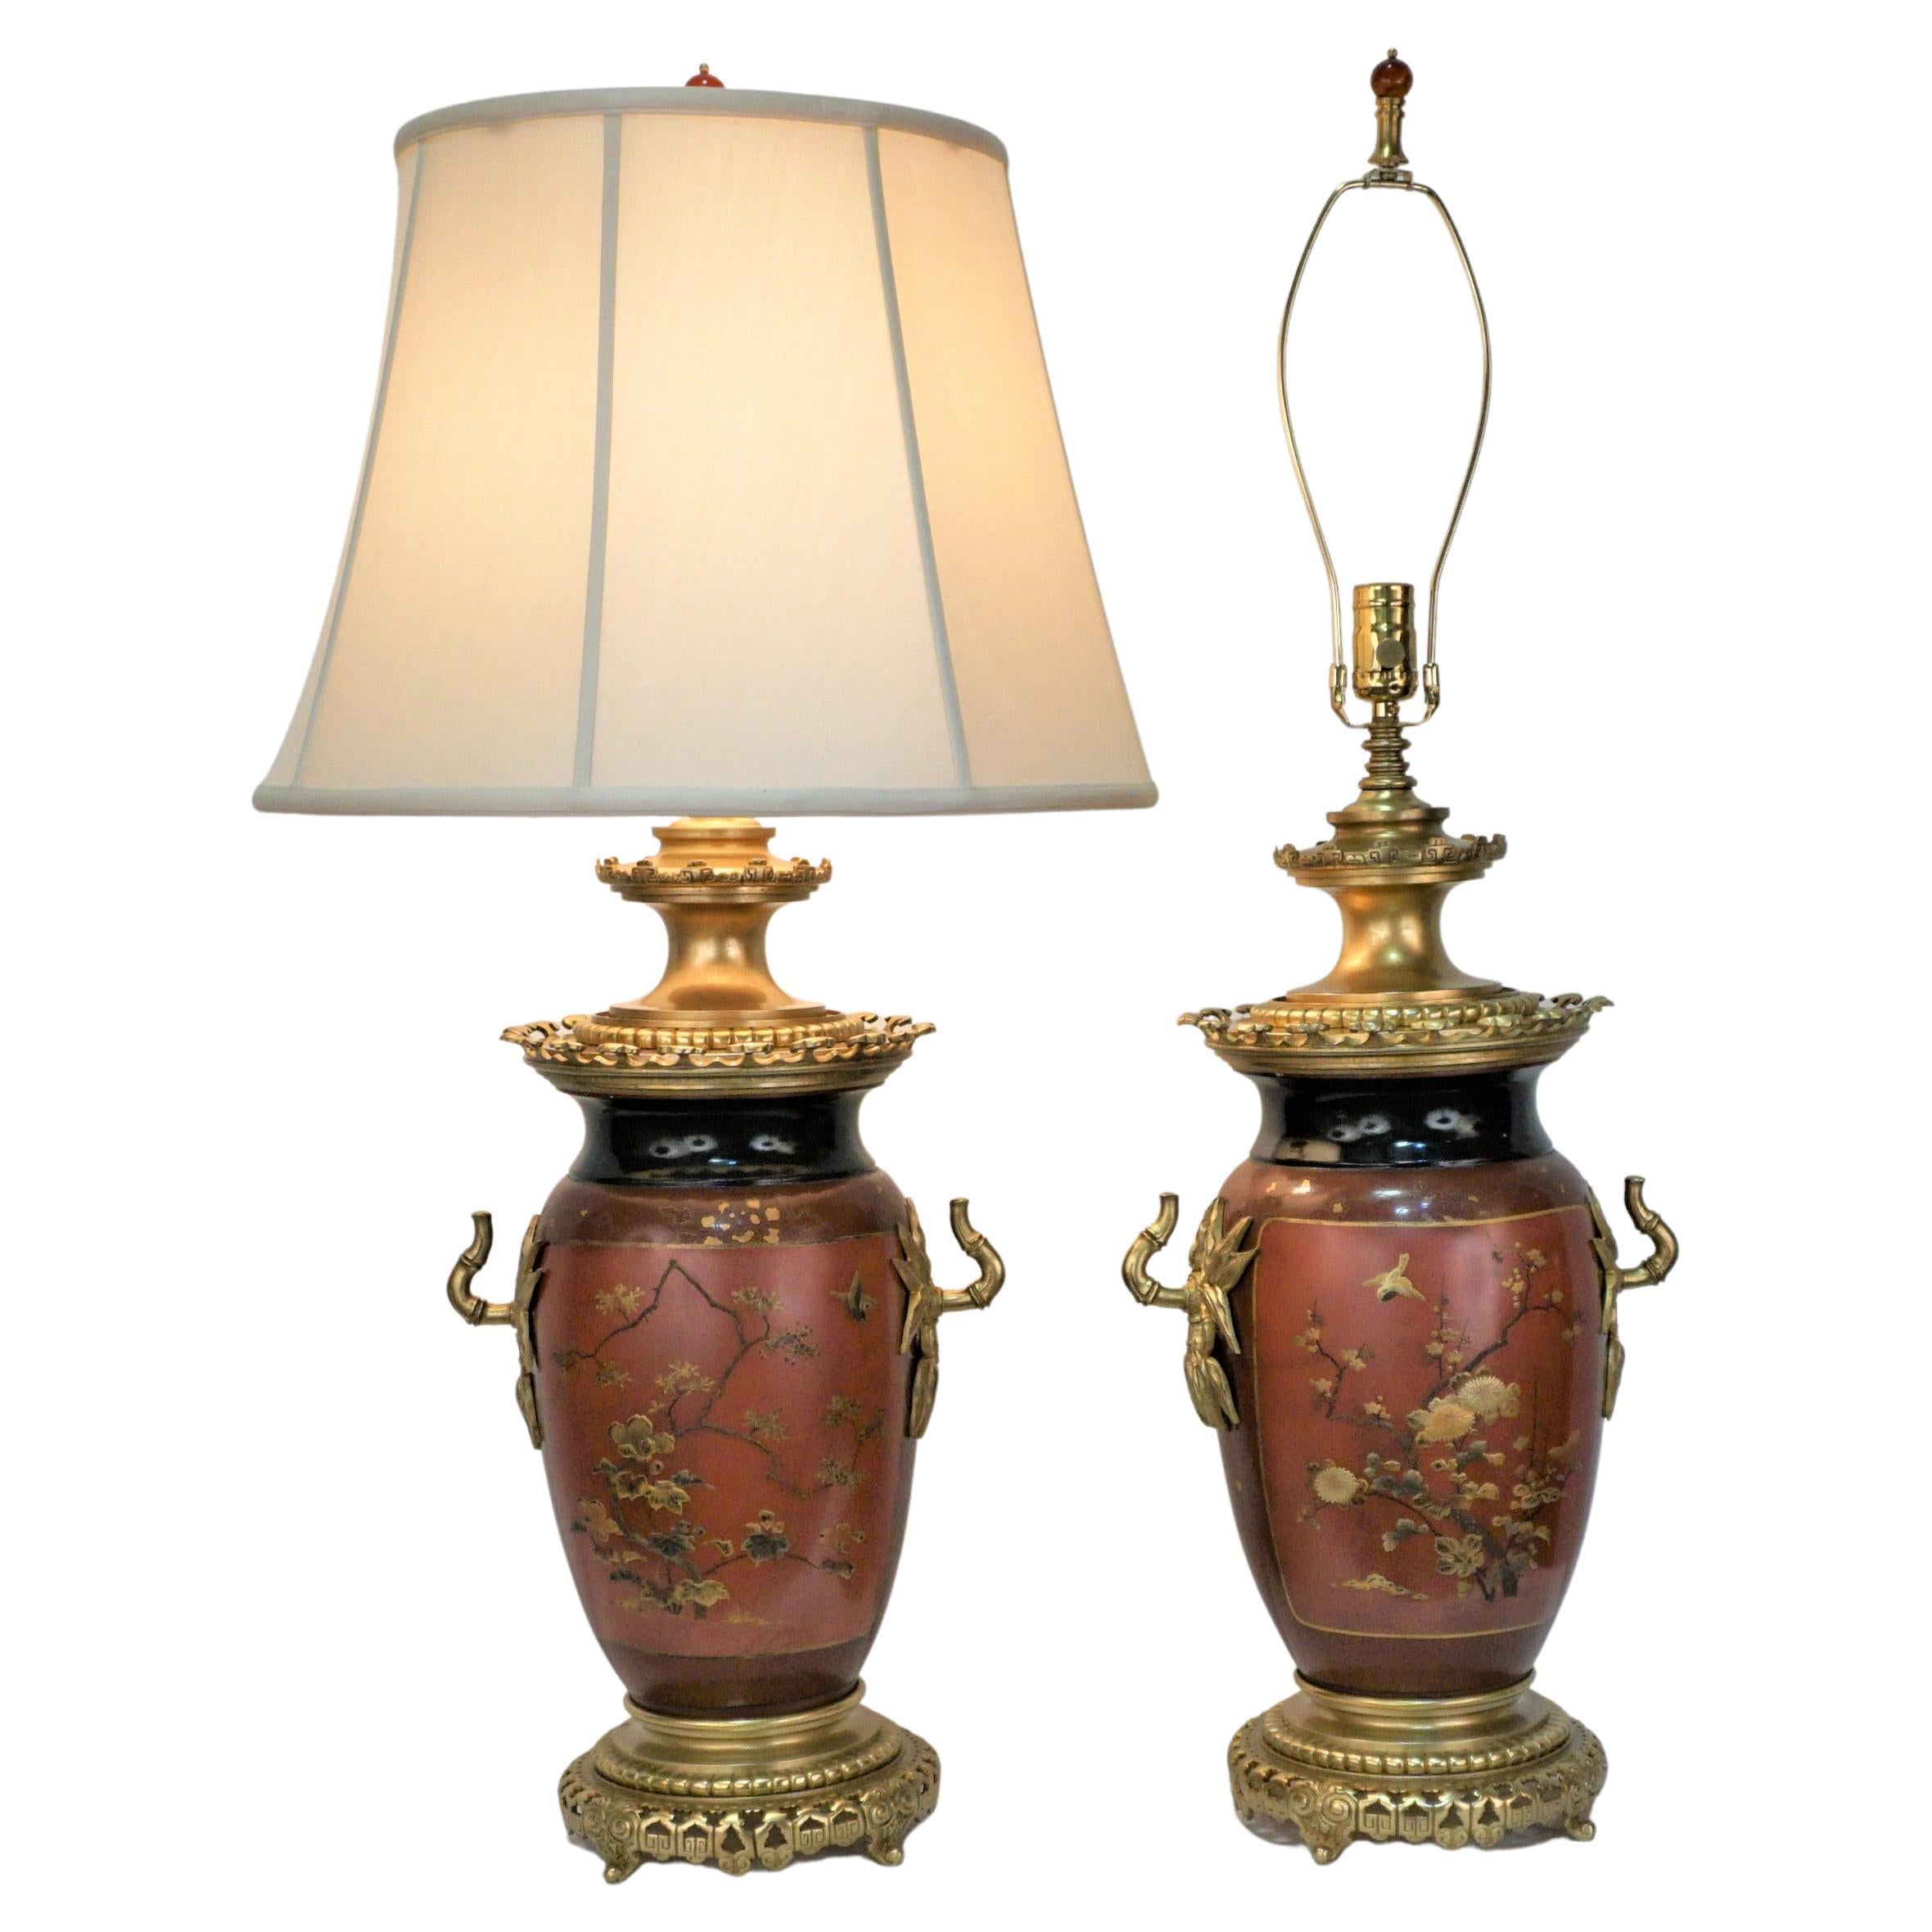 Pair of 19th Century French Chinoiserie Bronze & Porcelain Electrified Oil Lamps